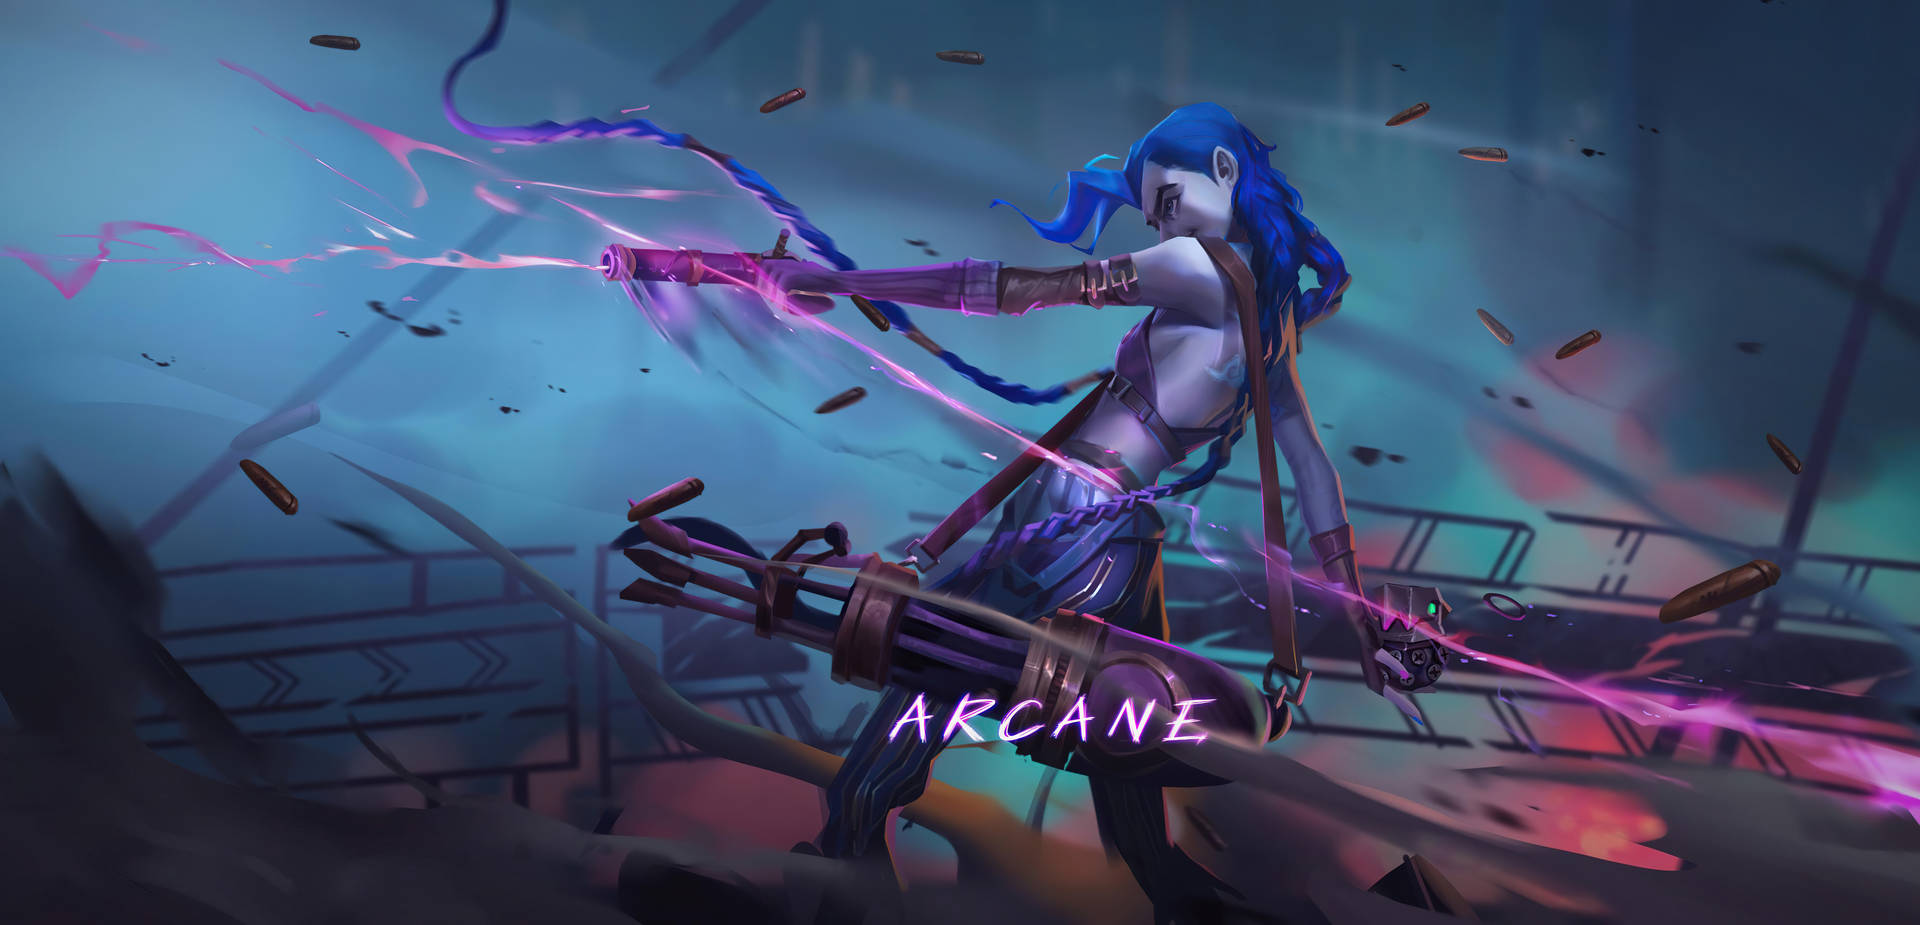 Epic Scene From Arcane: League Of Legends Animations